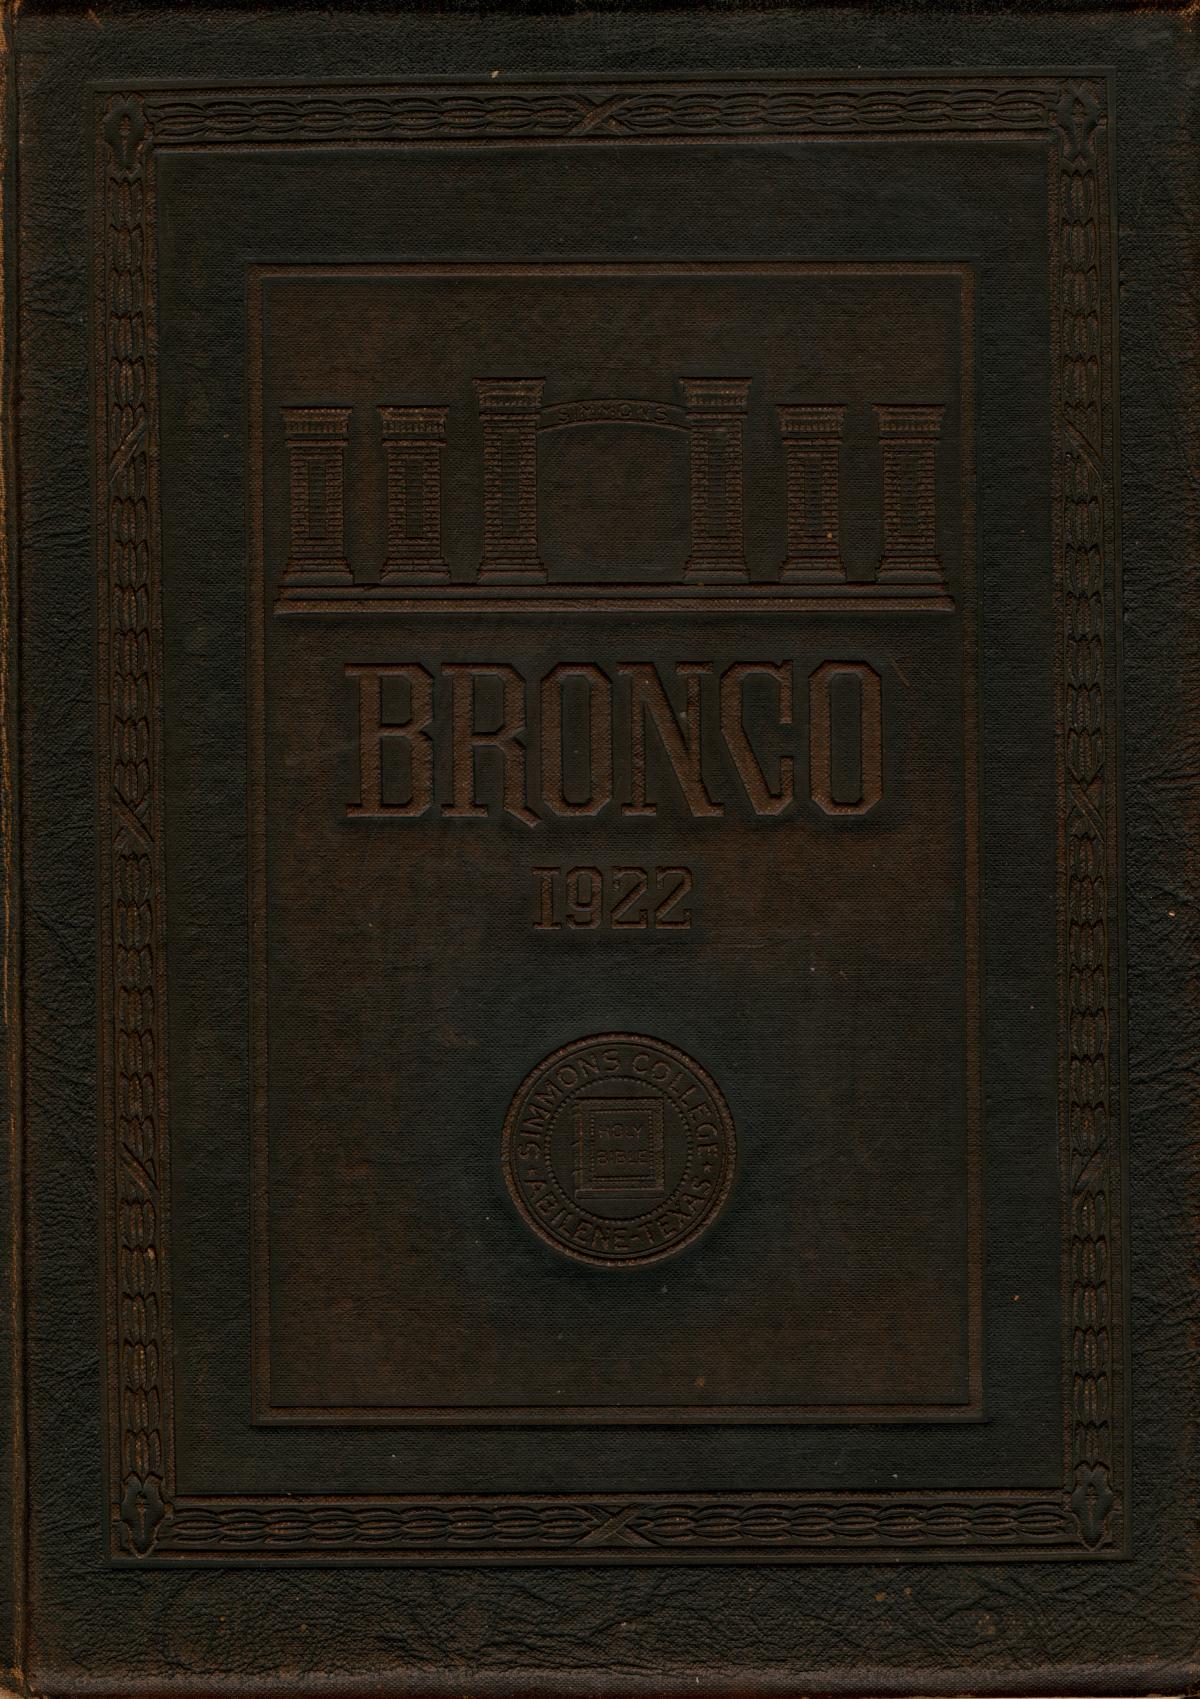 The Bronco, Yearbook of Simmons College, 1922
                                                
                                                    Front Cover
                                                